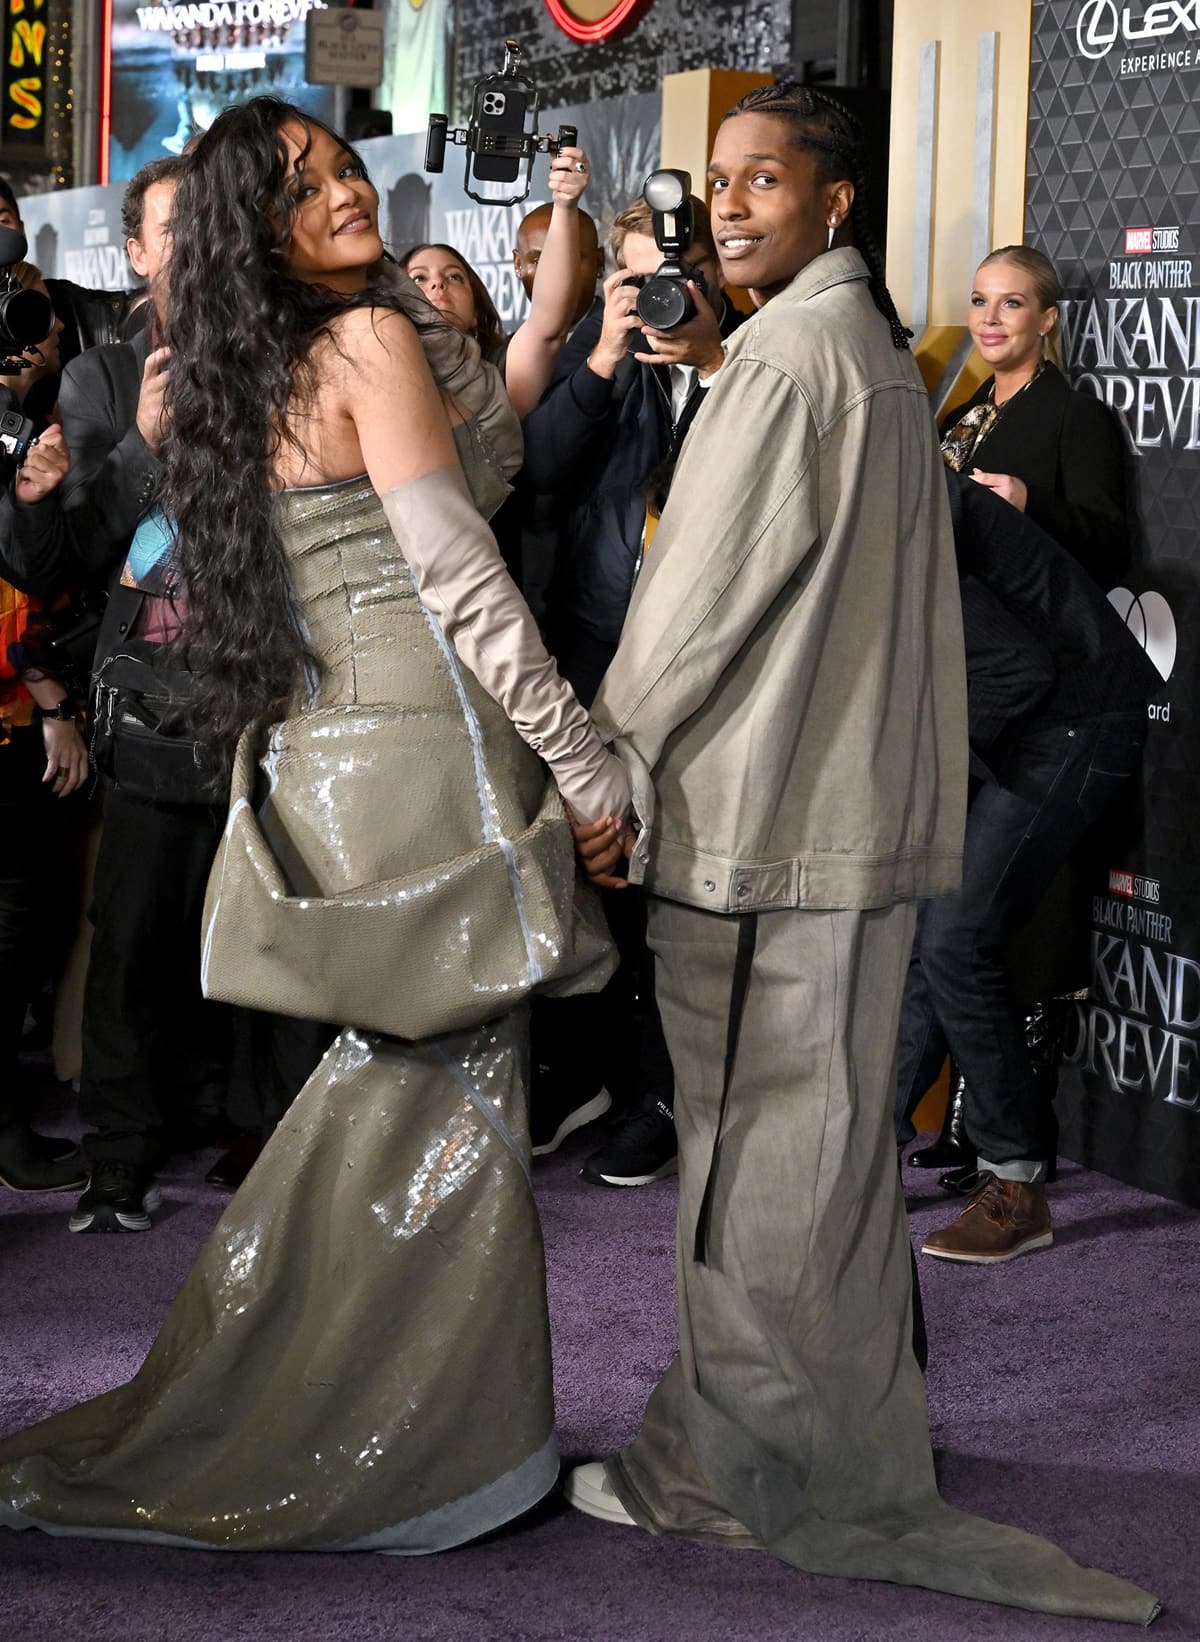 Rihanna, in an olive green Rick Owens dress paired with lengthy gloves, and A$AP Rocky, in an oversized khaki jacket and matching pants, attend Marvel Studios' "Black Panther: Wakanda Forever" premiere